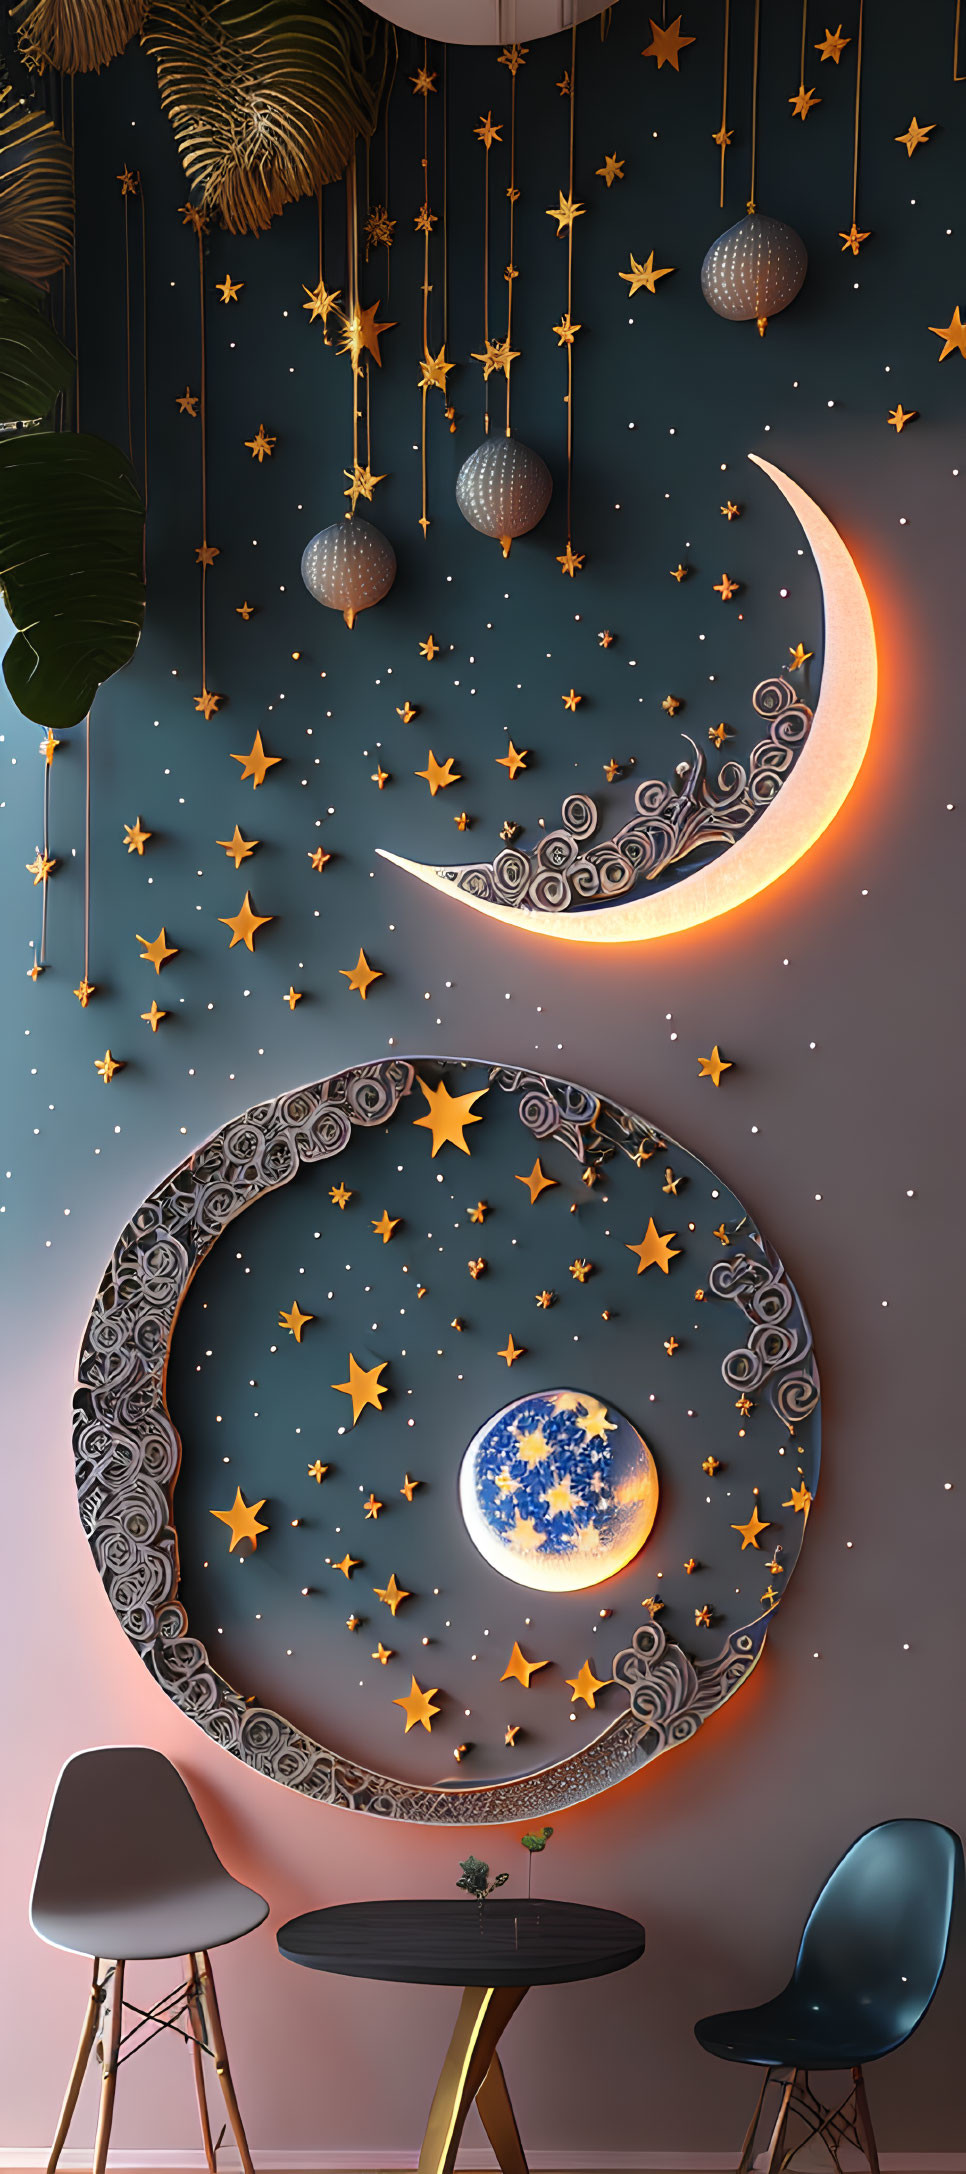 Celestial-themed room with crescent moon, stars, planets, and round mirror